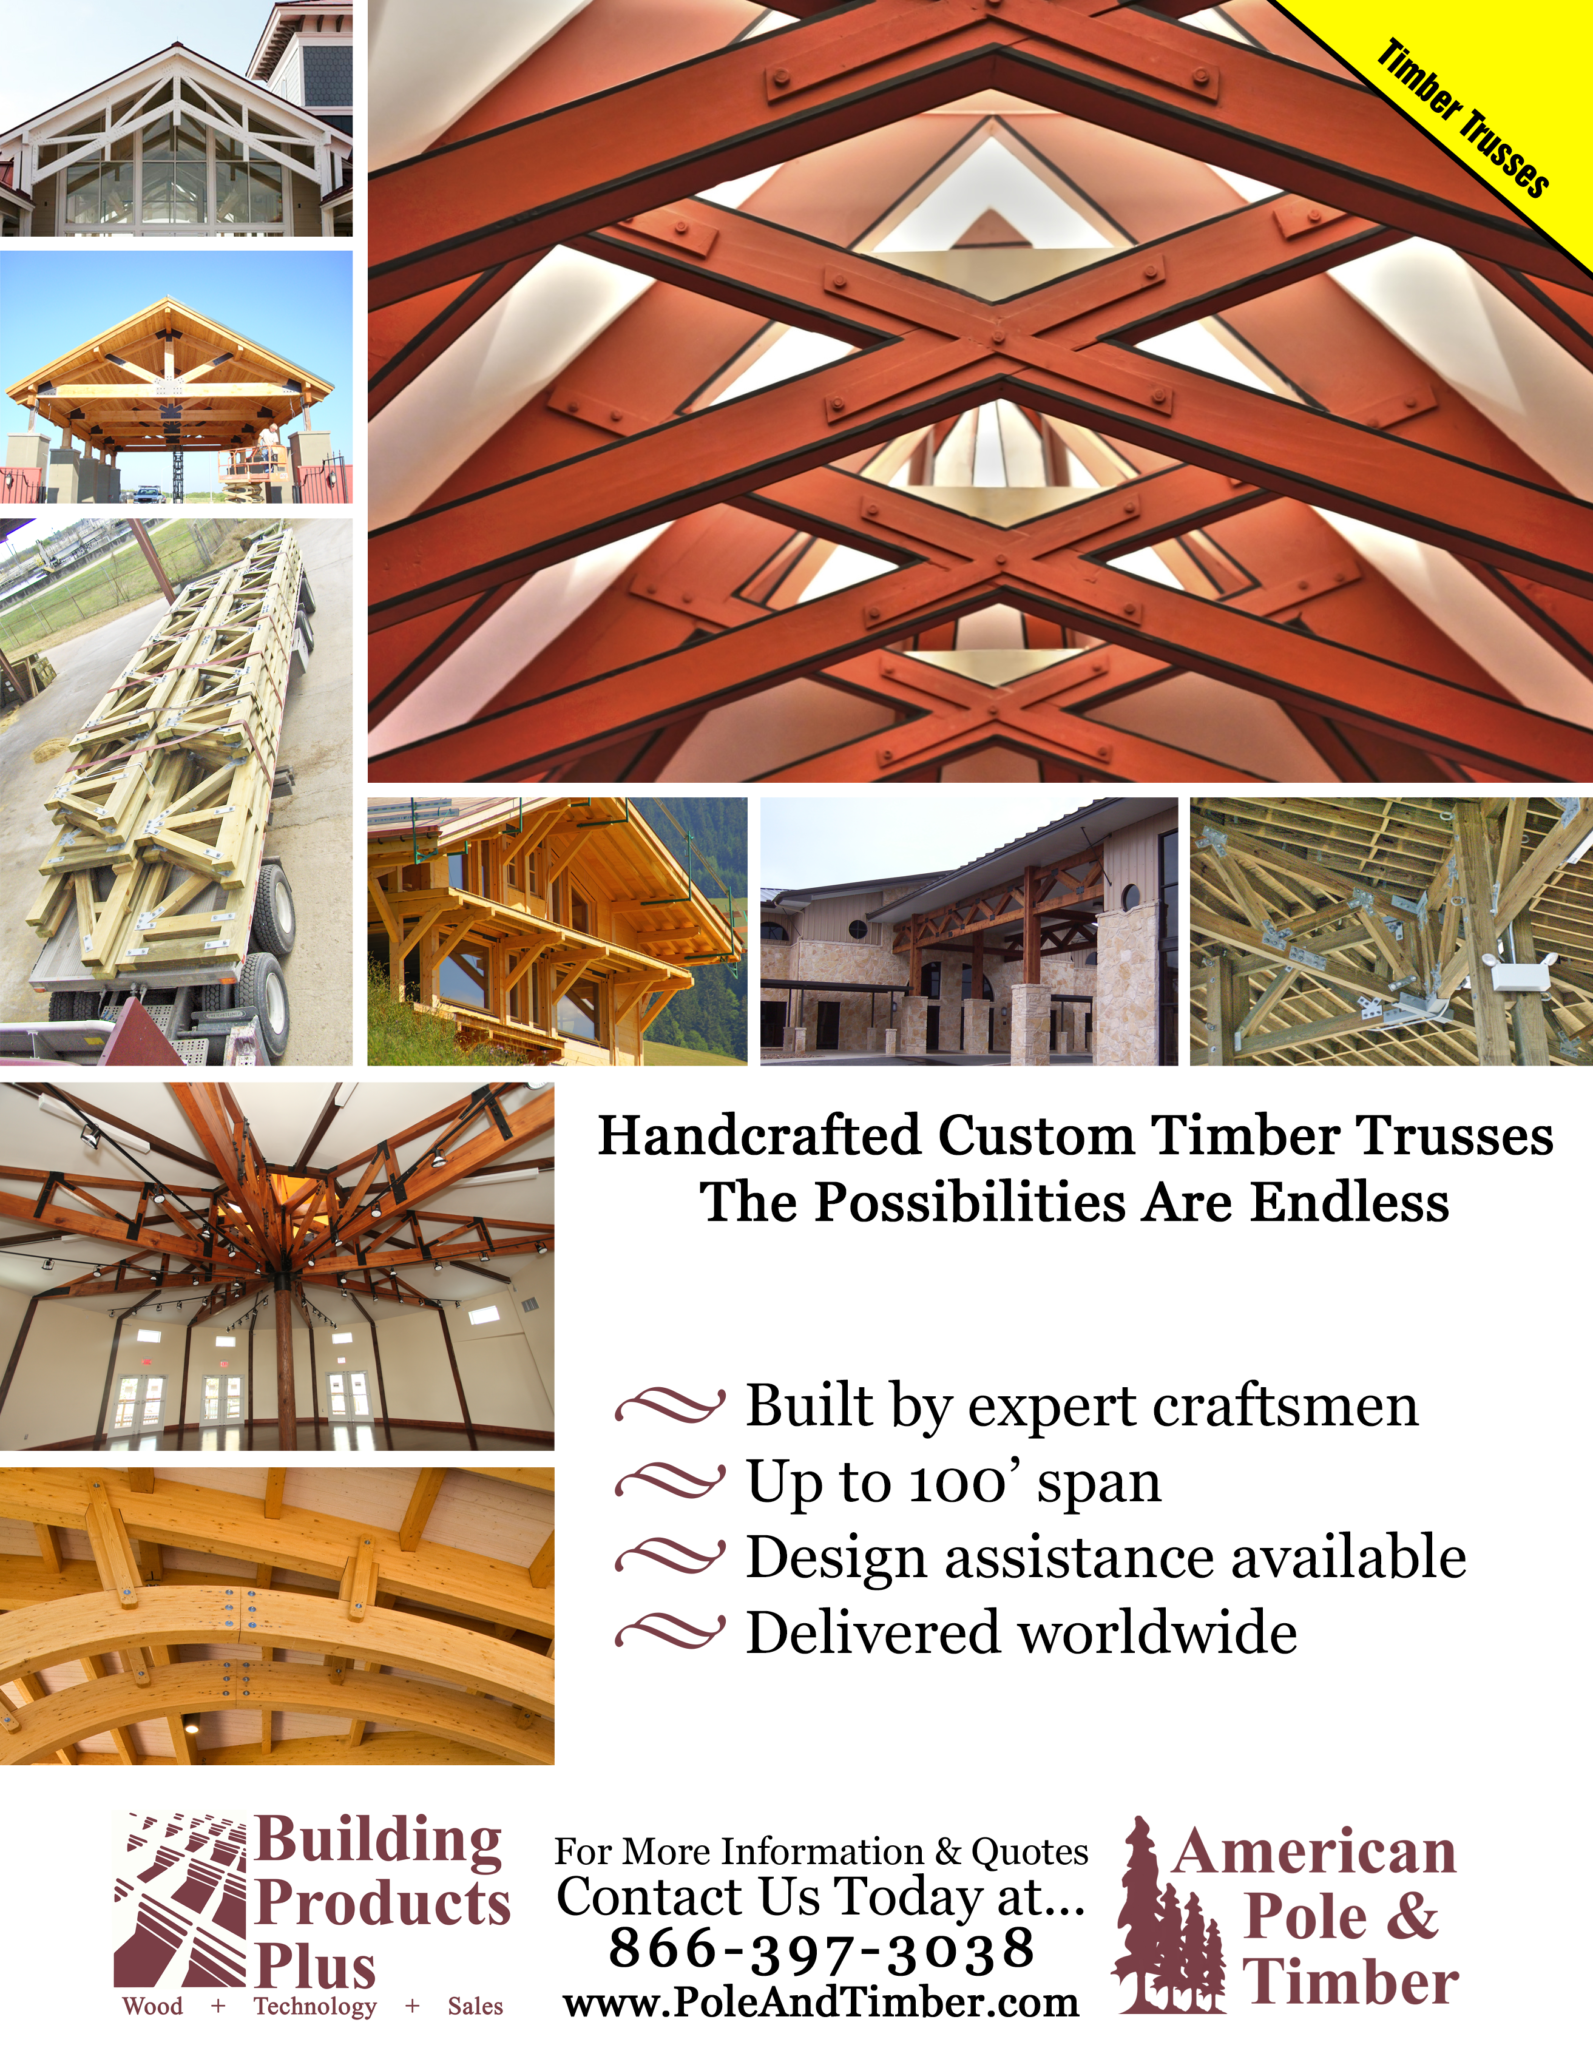 Handcrafted Custom Timber Trusses